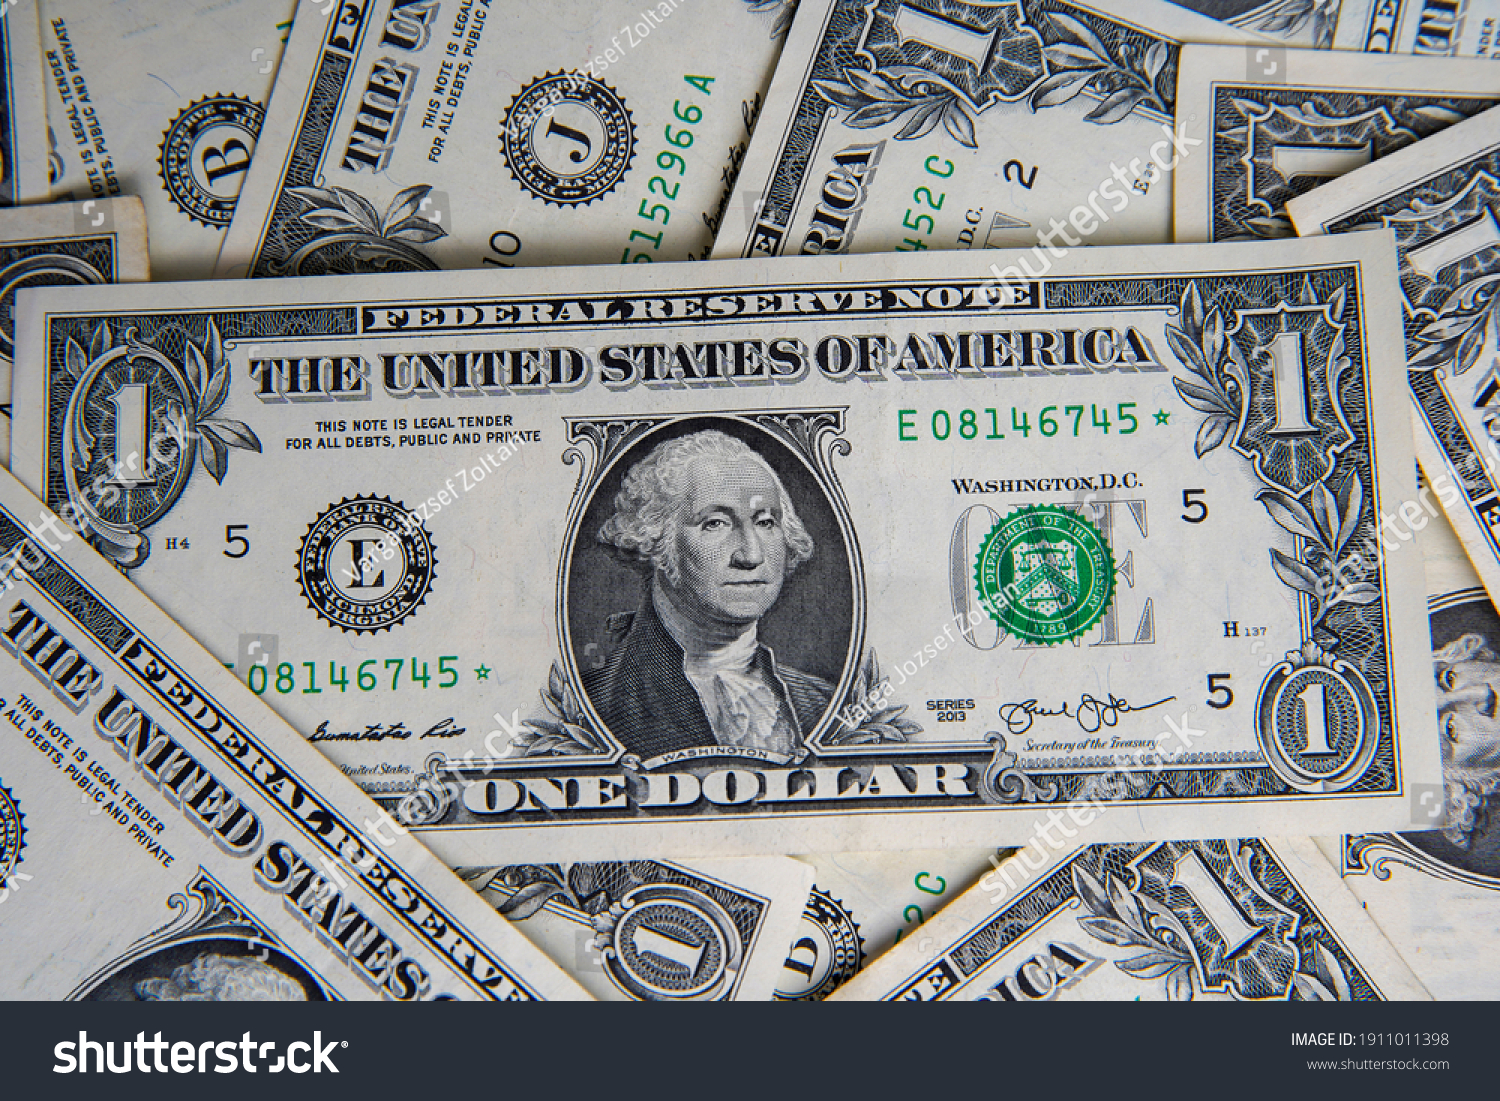 American one dollar banknotes wallpaper. Close up of money. Wealth concept, free trade, business concept background. #1911011398